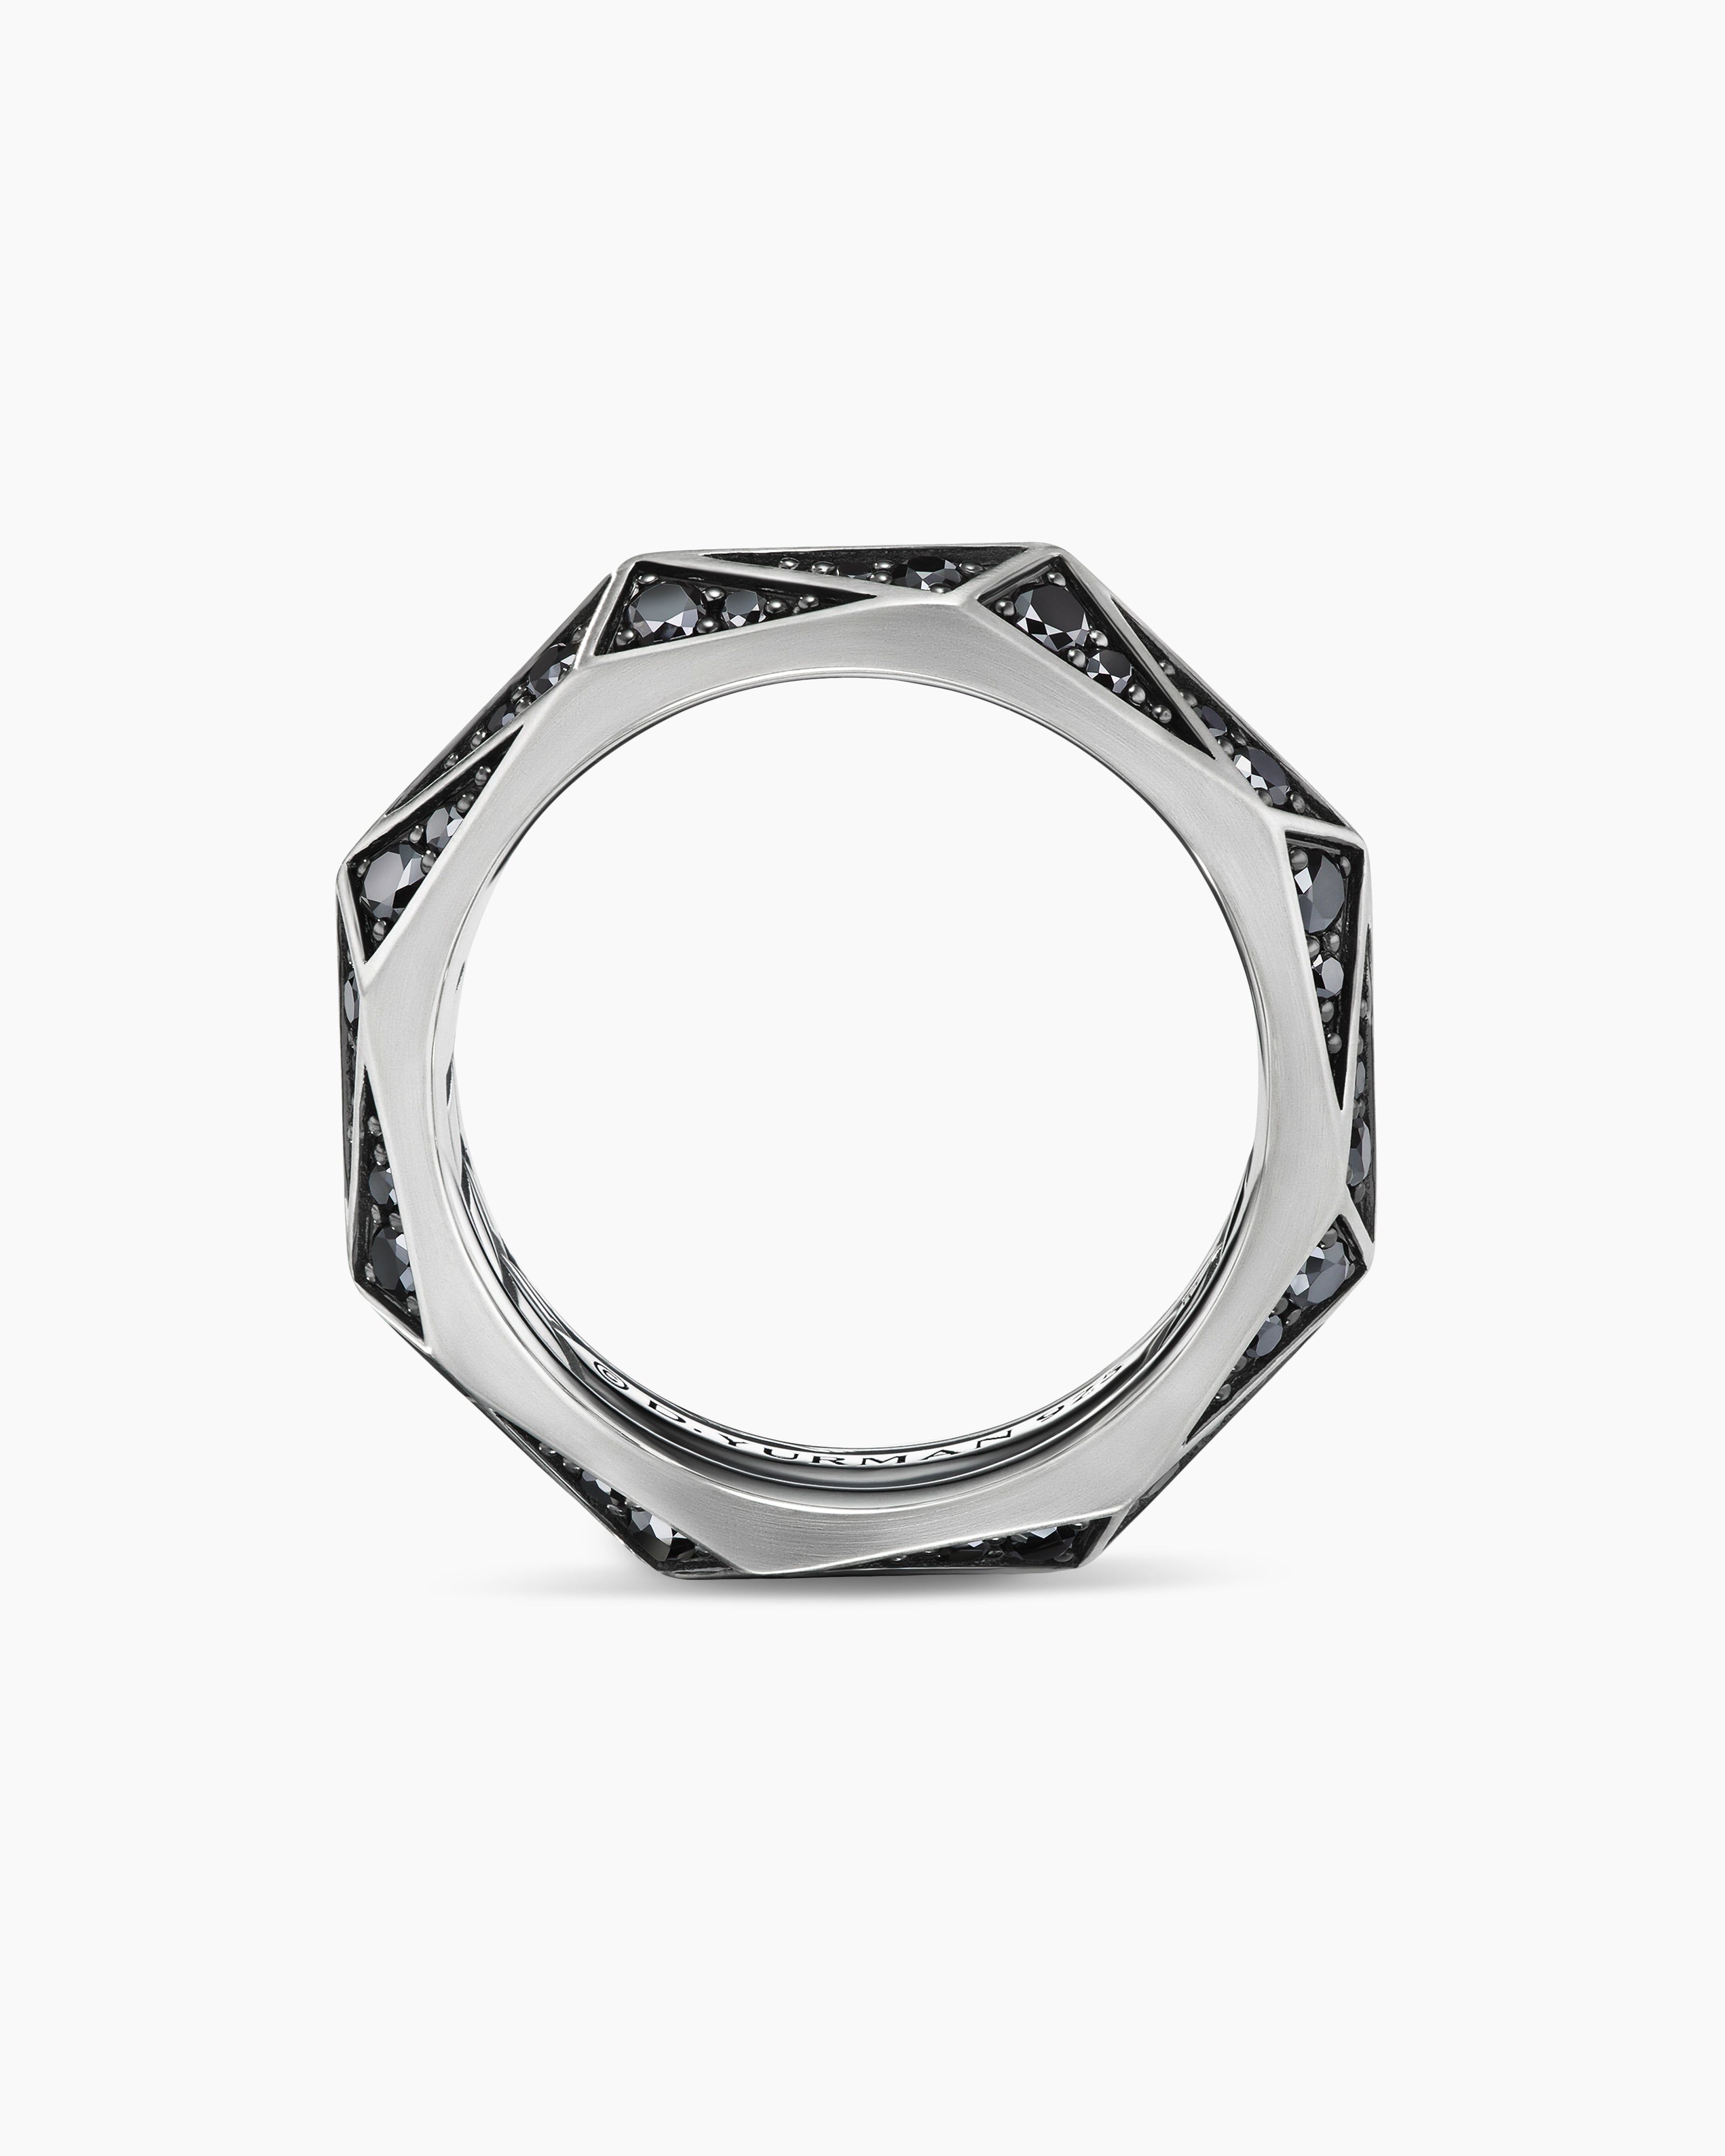 B & Iya Faceted Sterling Silver Ring